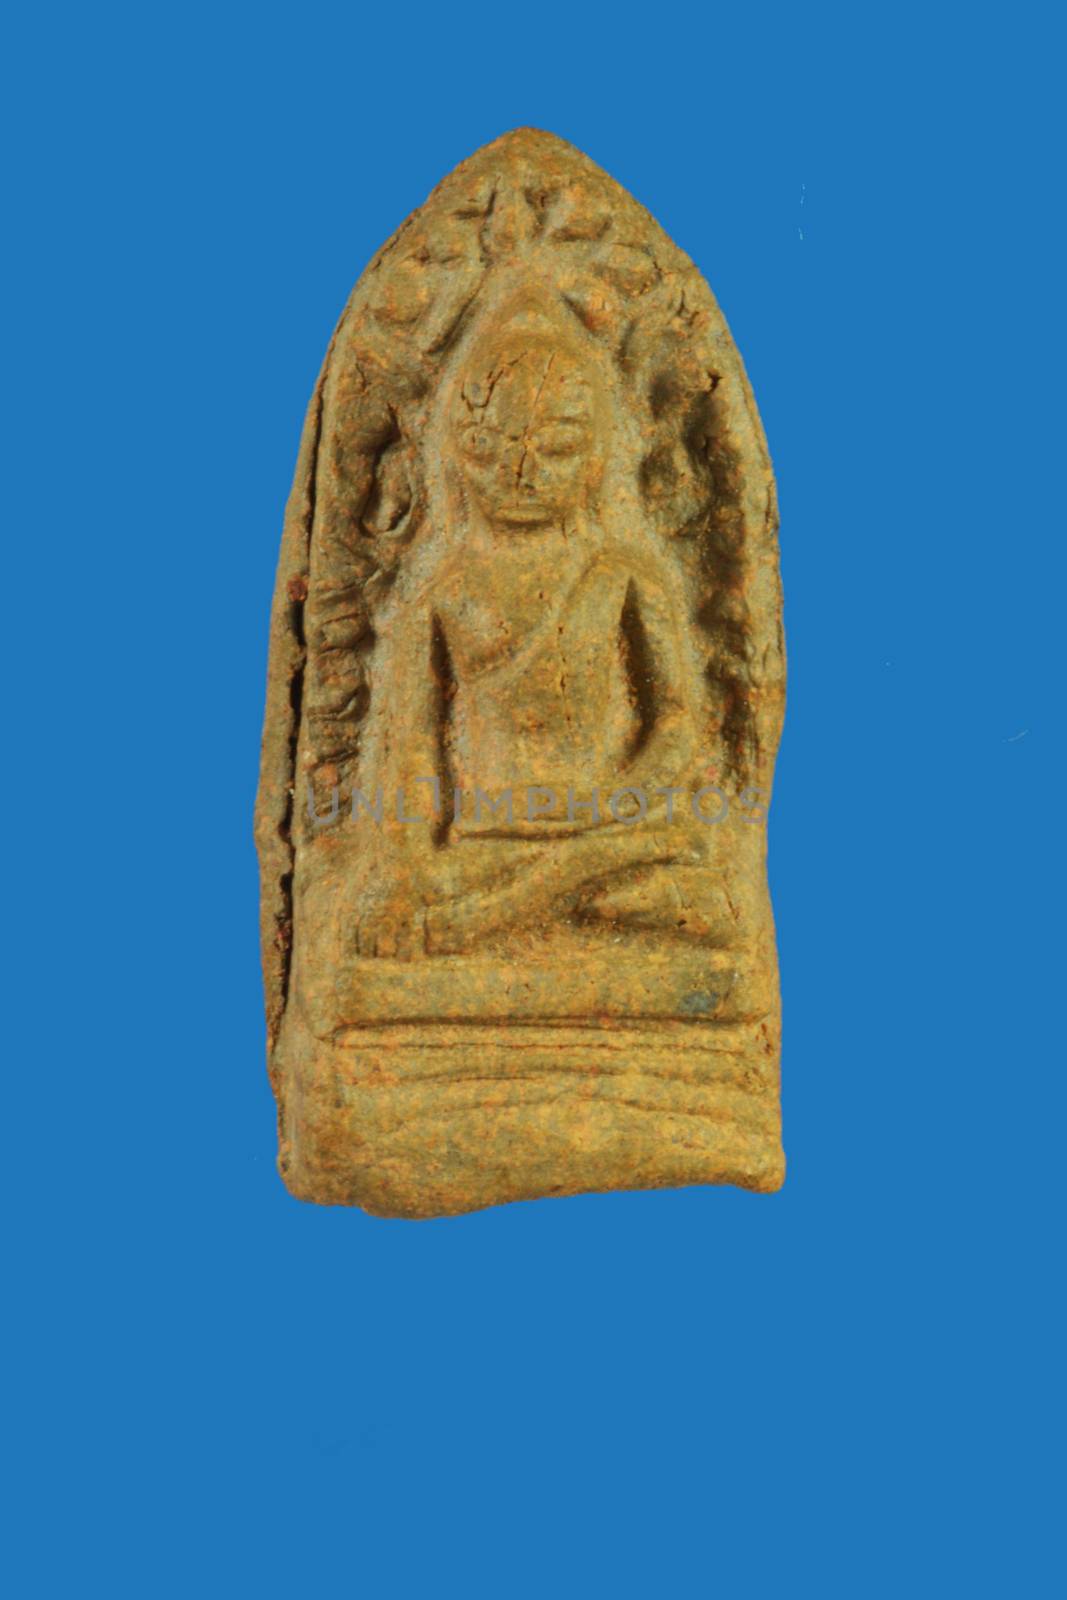 Phra Rod is the oldest amulet in Thailand, found at Wat Mahawan, Lampoon Province in Northern of Thailand